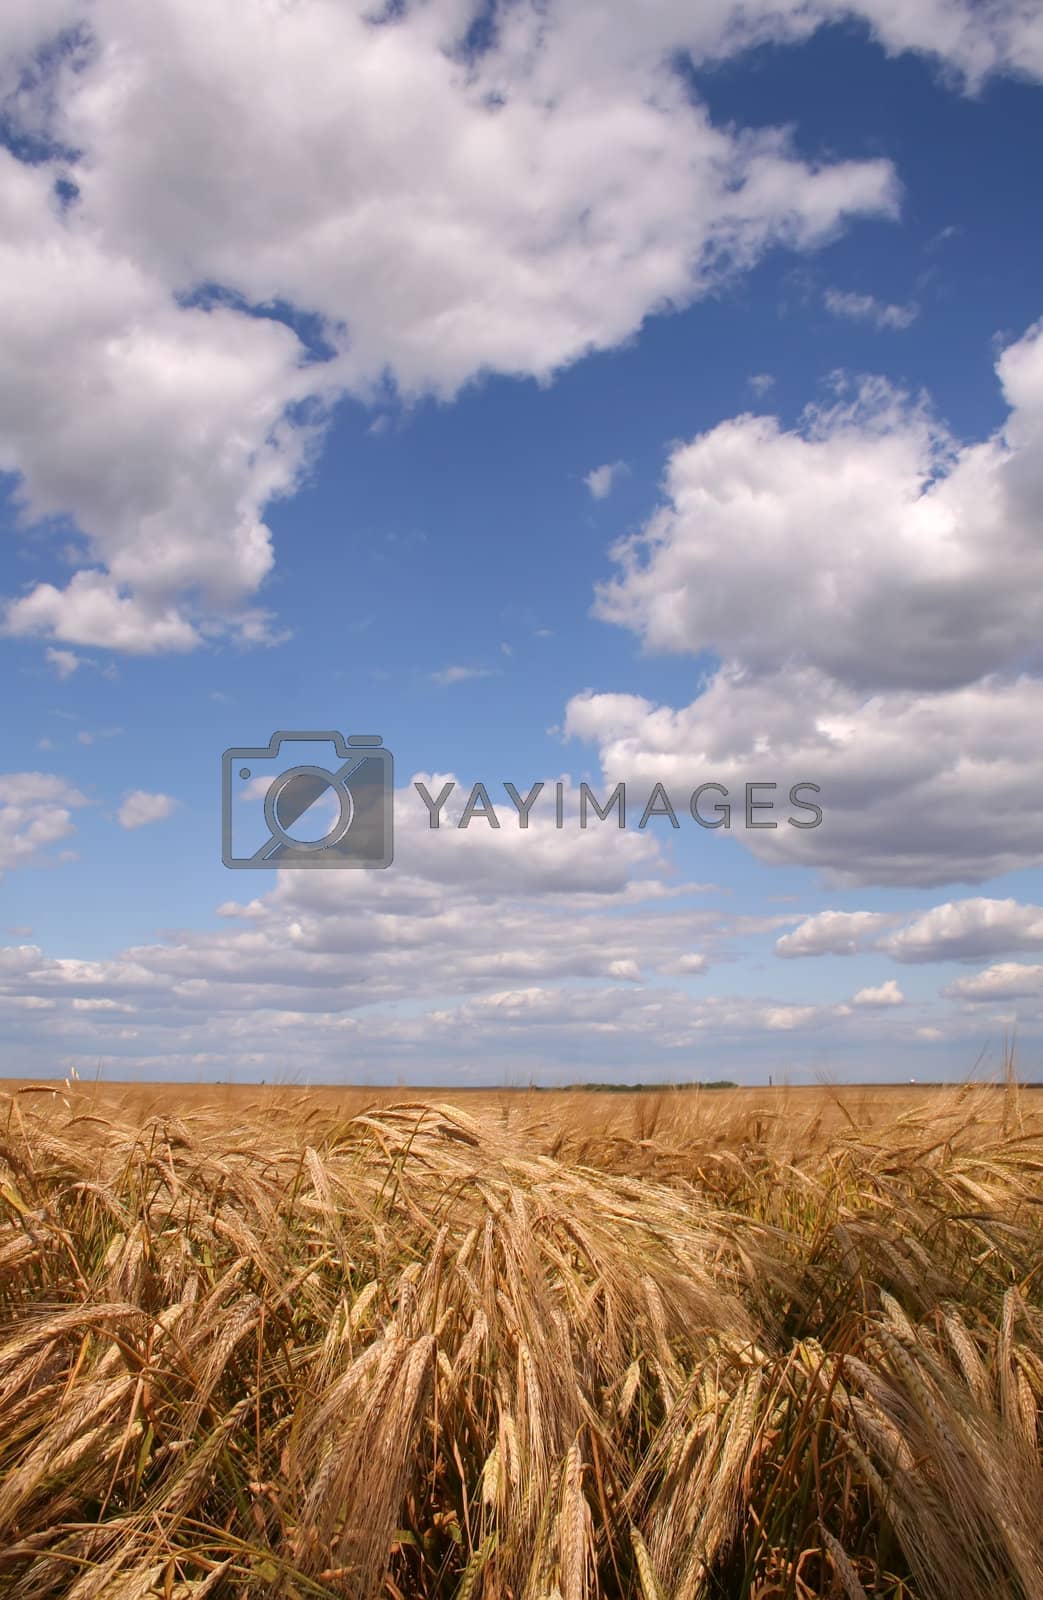 Royalty free image of Corn field by orson